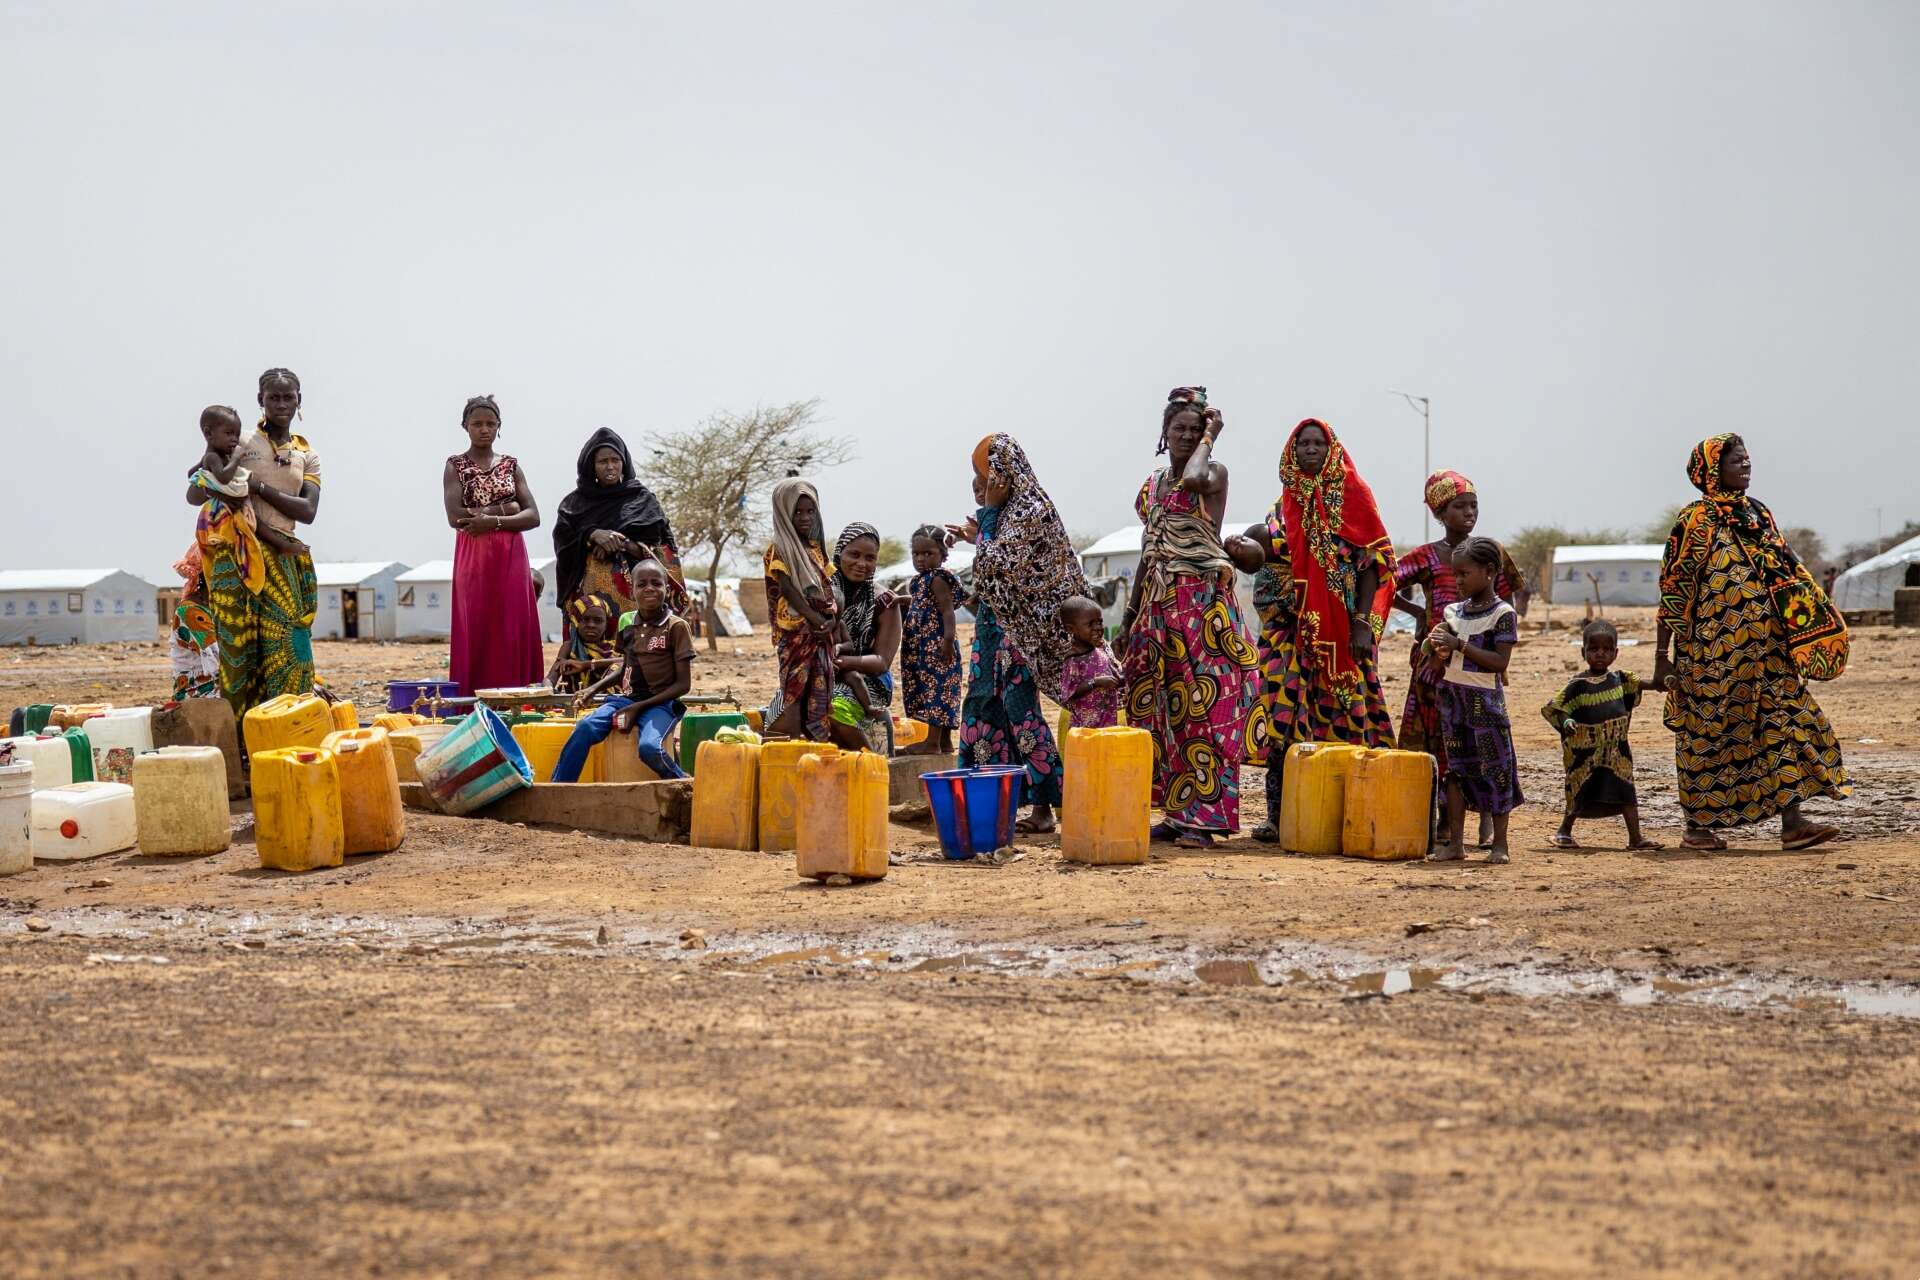 A group of women and children stand near a water collection point in Burkina Faso